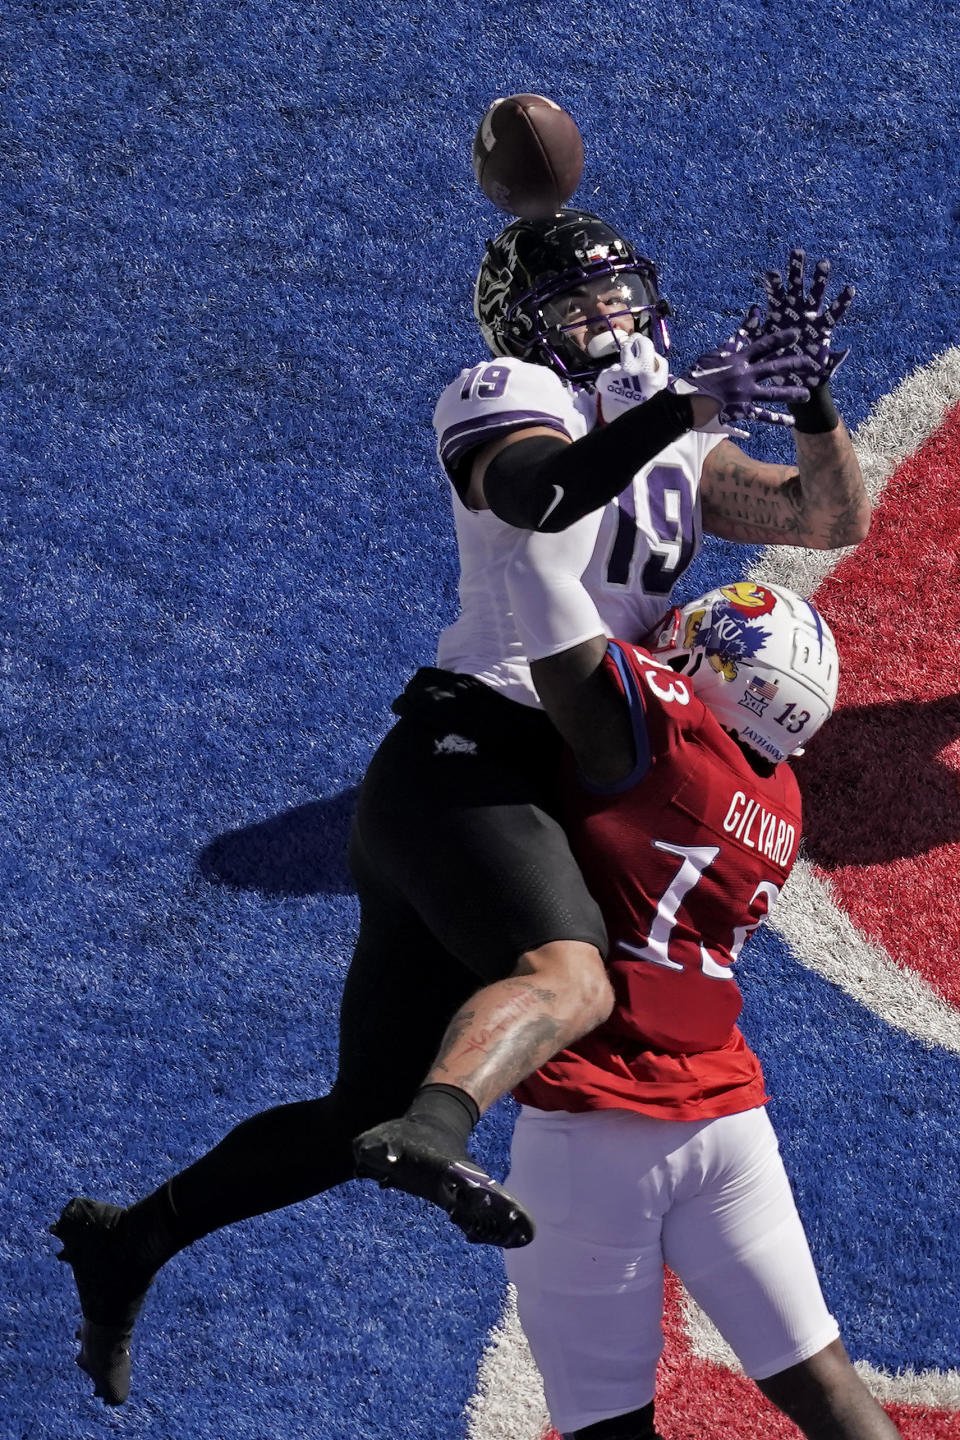 Kansas linebacker Eriq Gilyard (13) breaks up a pass intended for TCU tight end Jared Wiley (19) during the first half of an NCAA college football game Saturday, Oct. 8, 2022, in Lawrence, Kan. (AP Photo/Charlie Riedel)